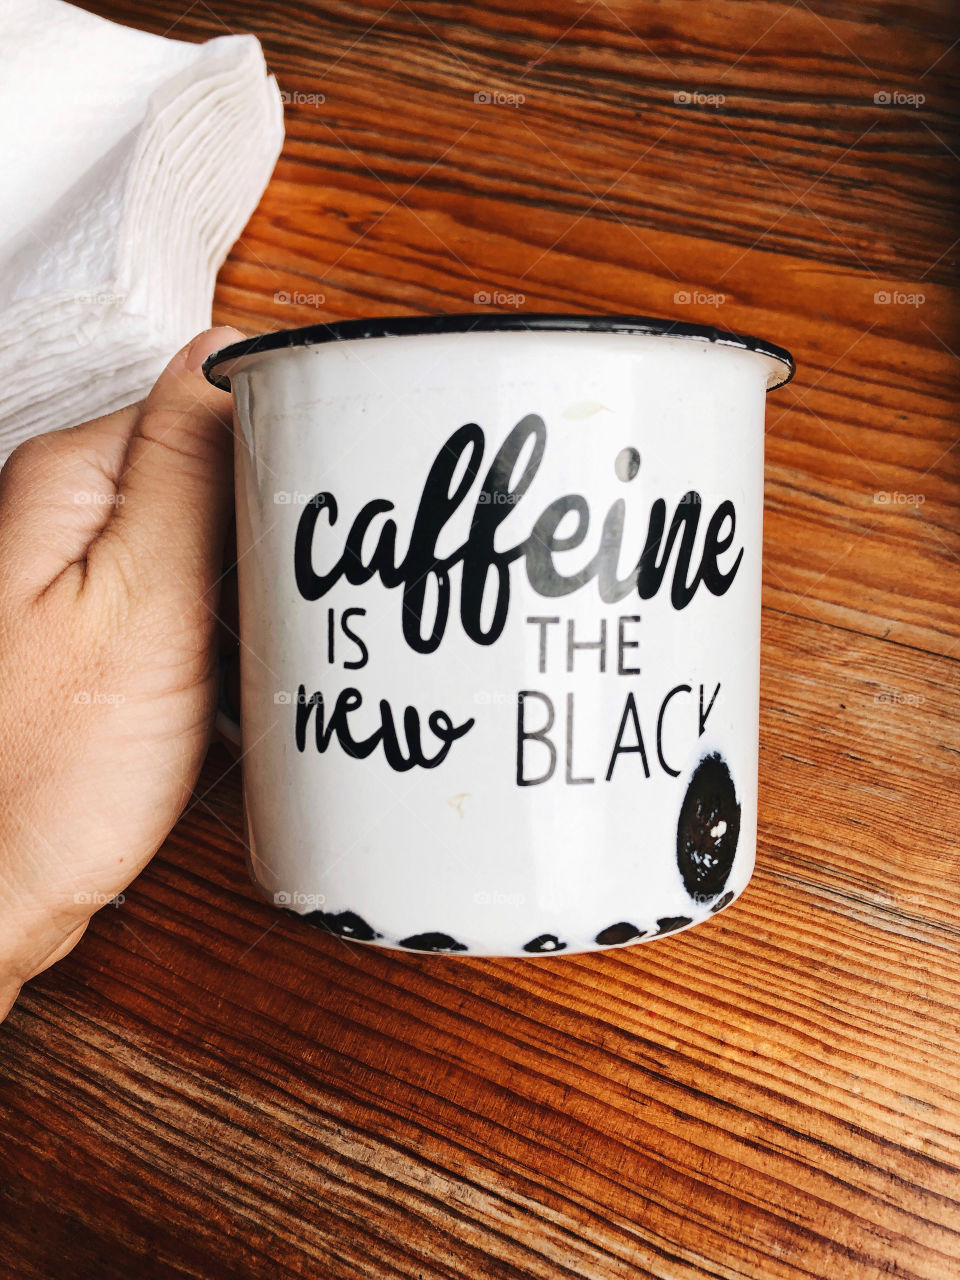 Caffein is the new black